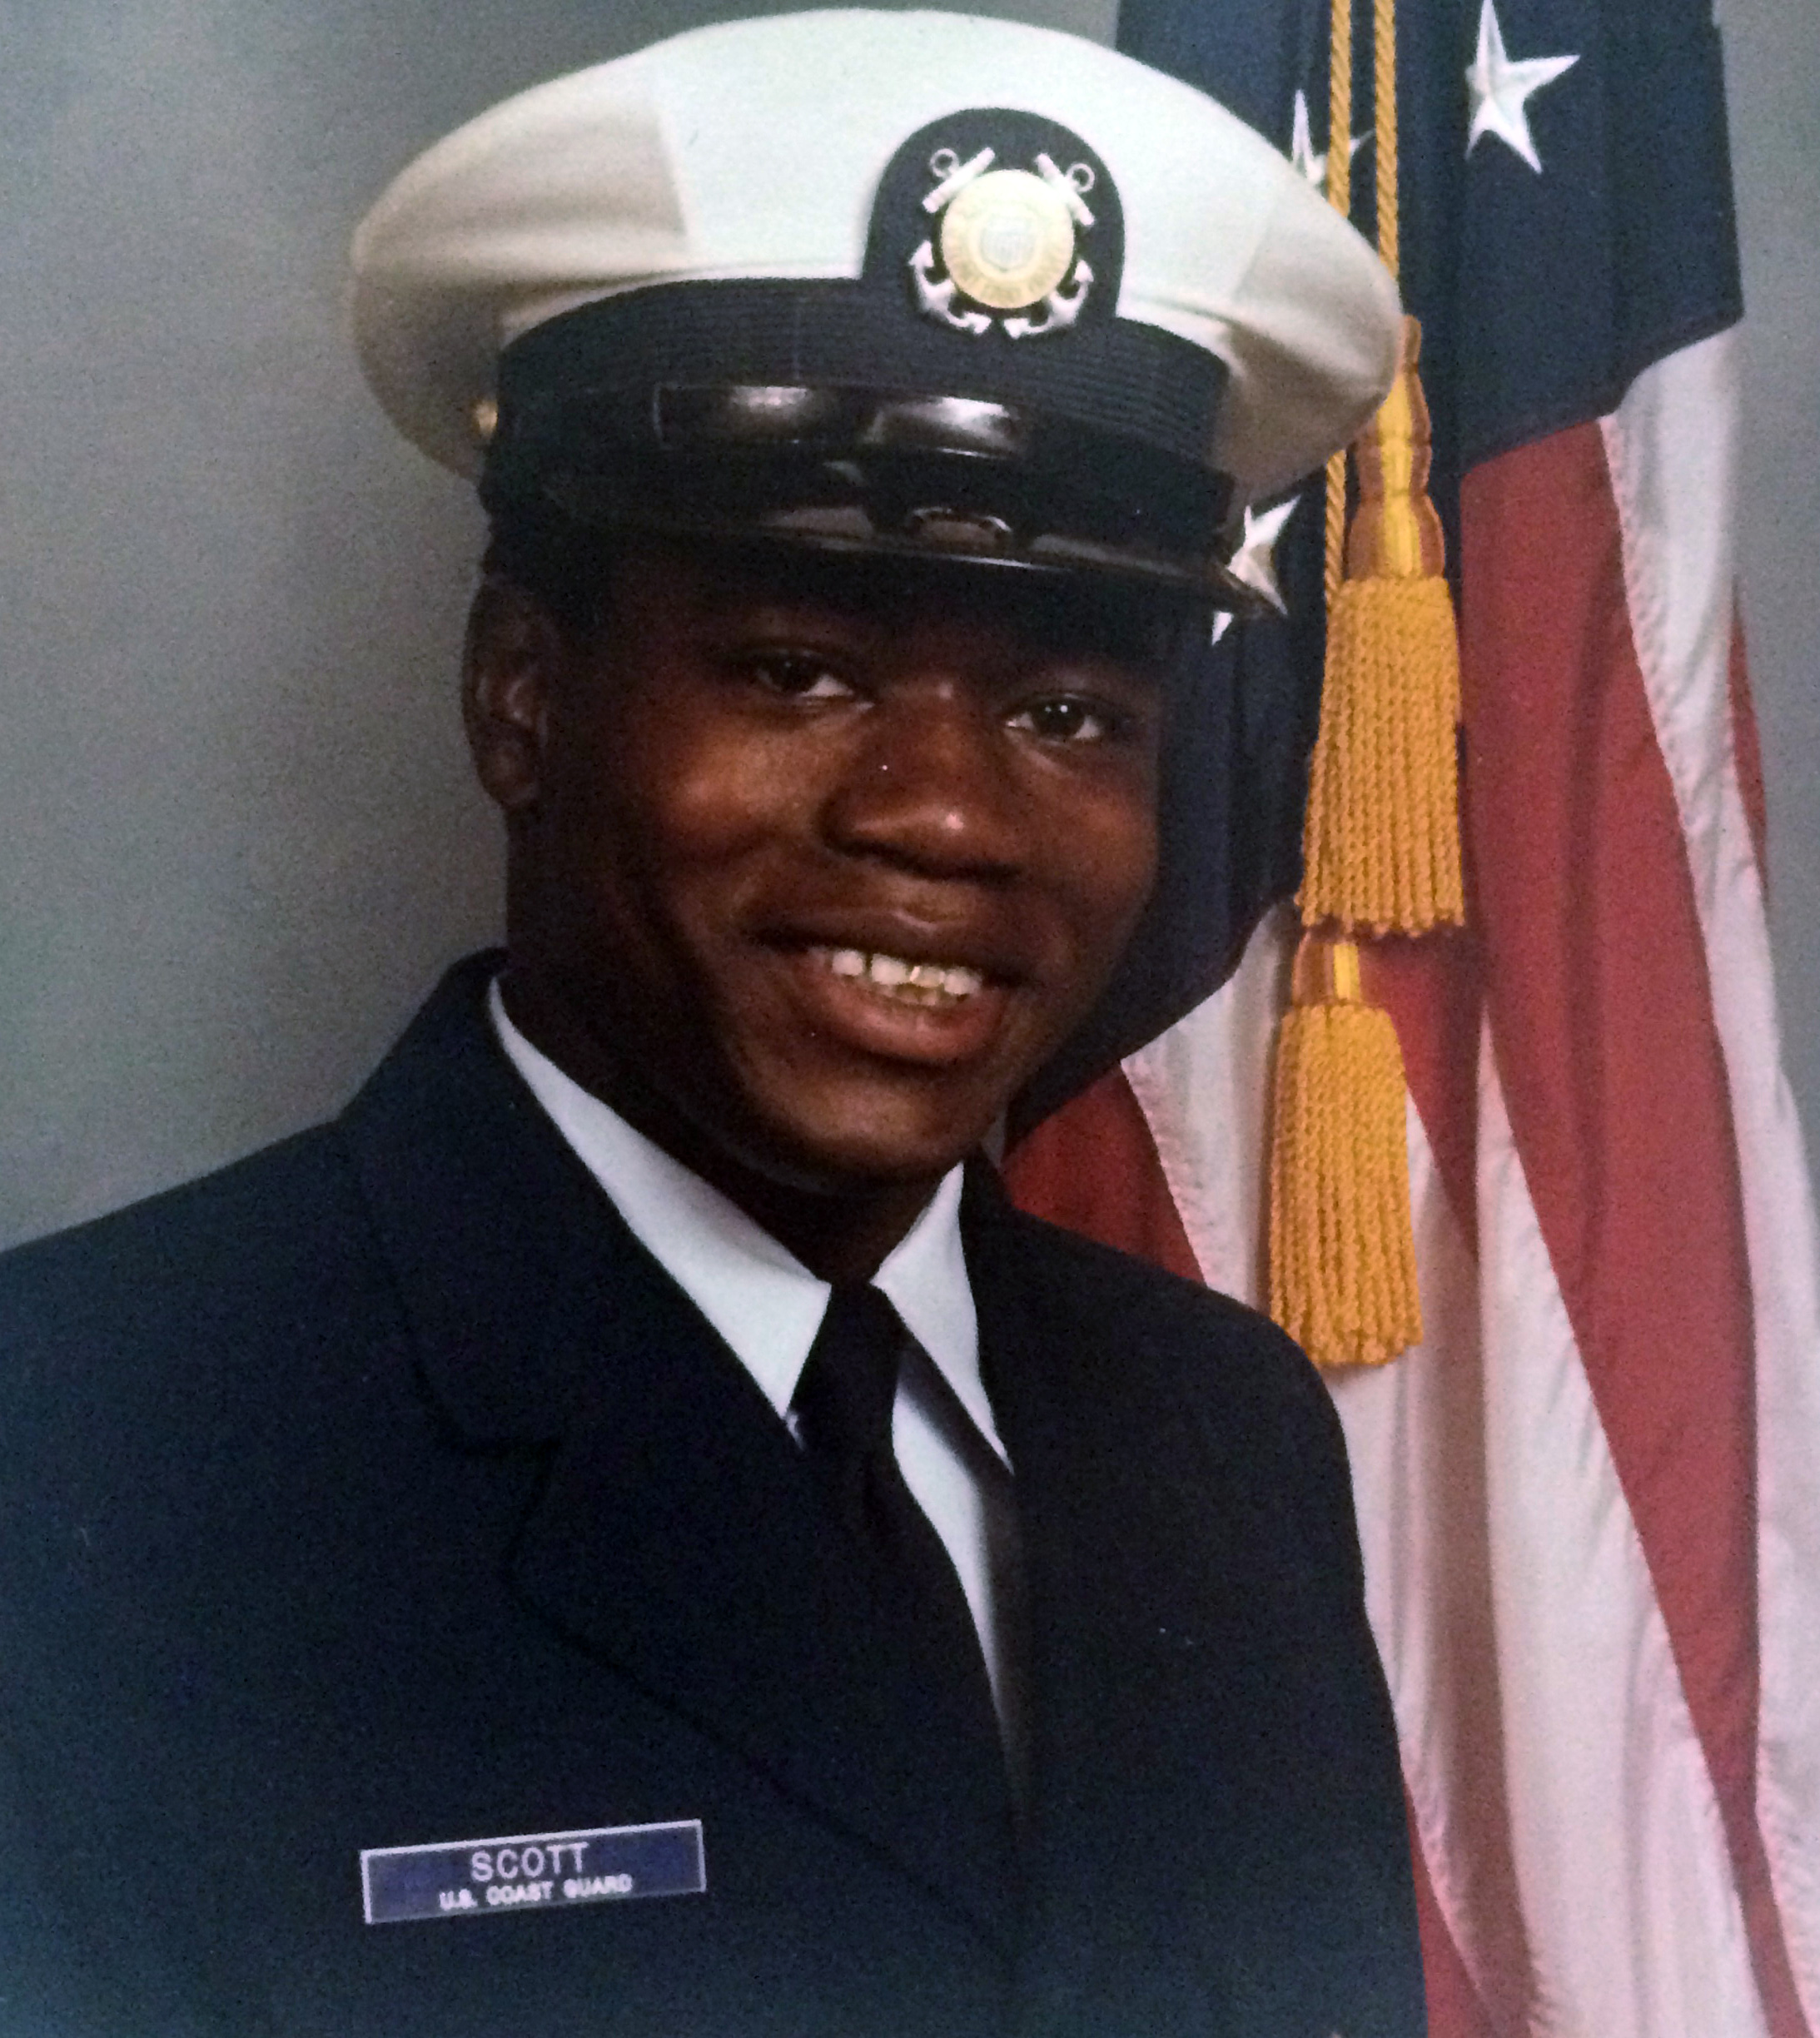 PHOTO: This undated photo shows Walter Scott who was shot and killed by a police officer on April 4, 2015 in North Charleston, S.C. 